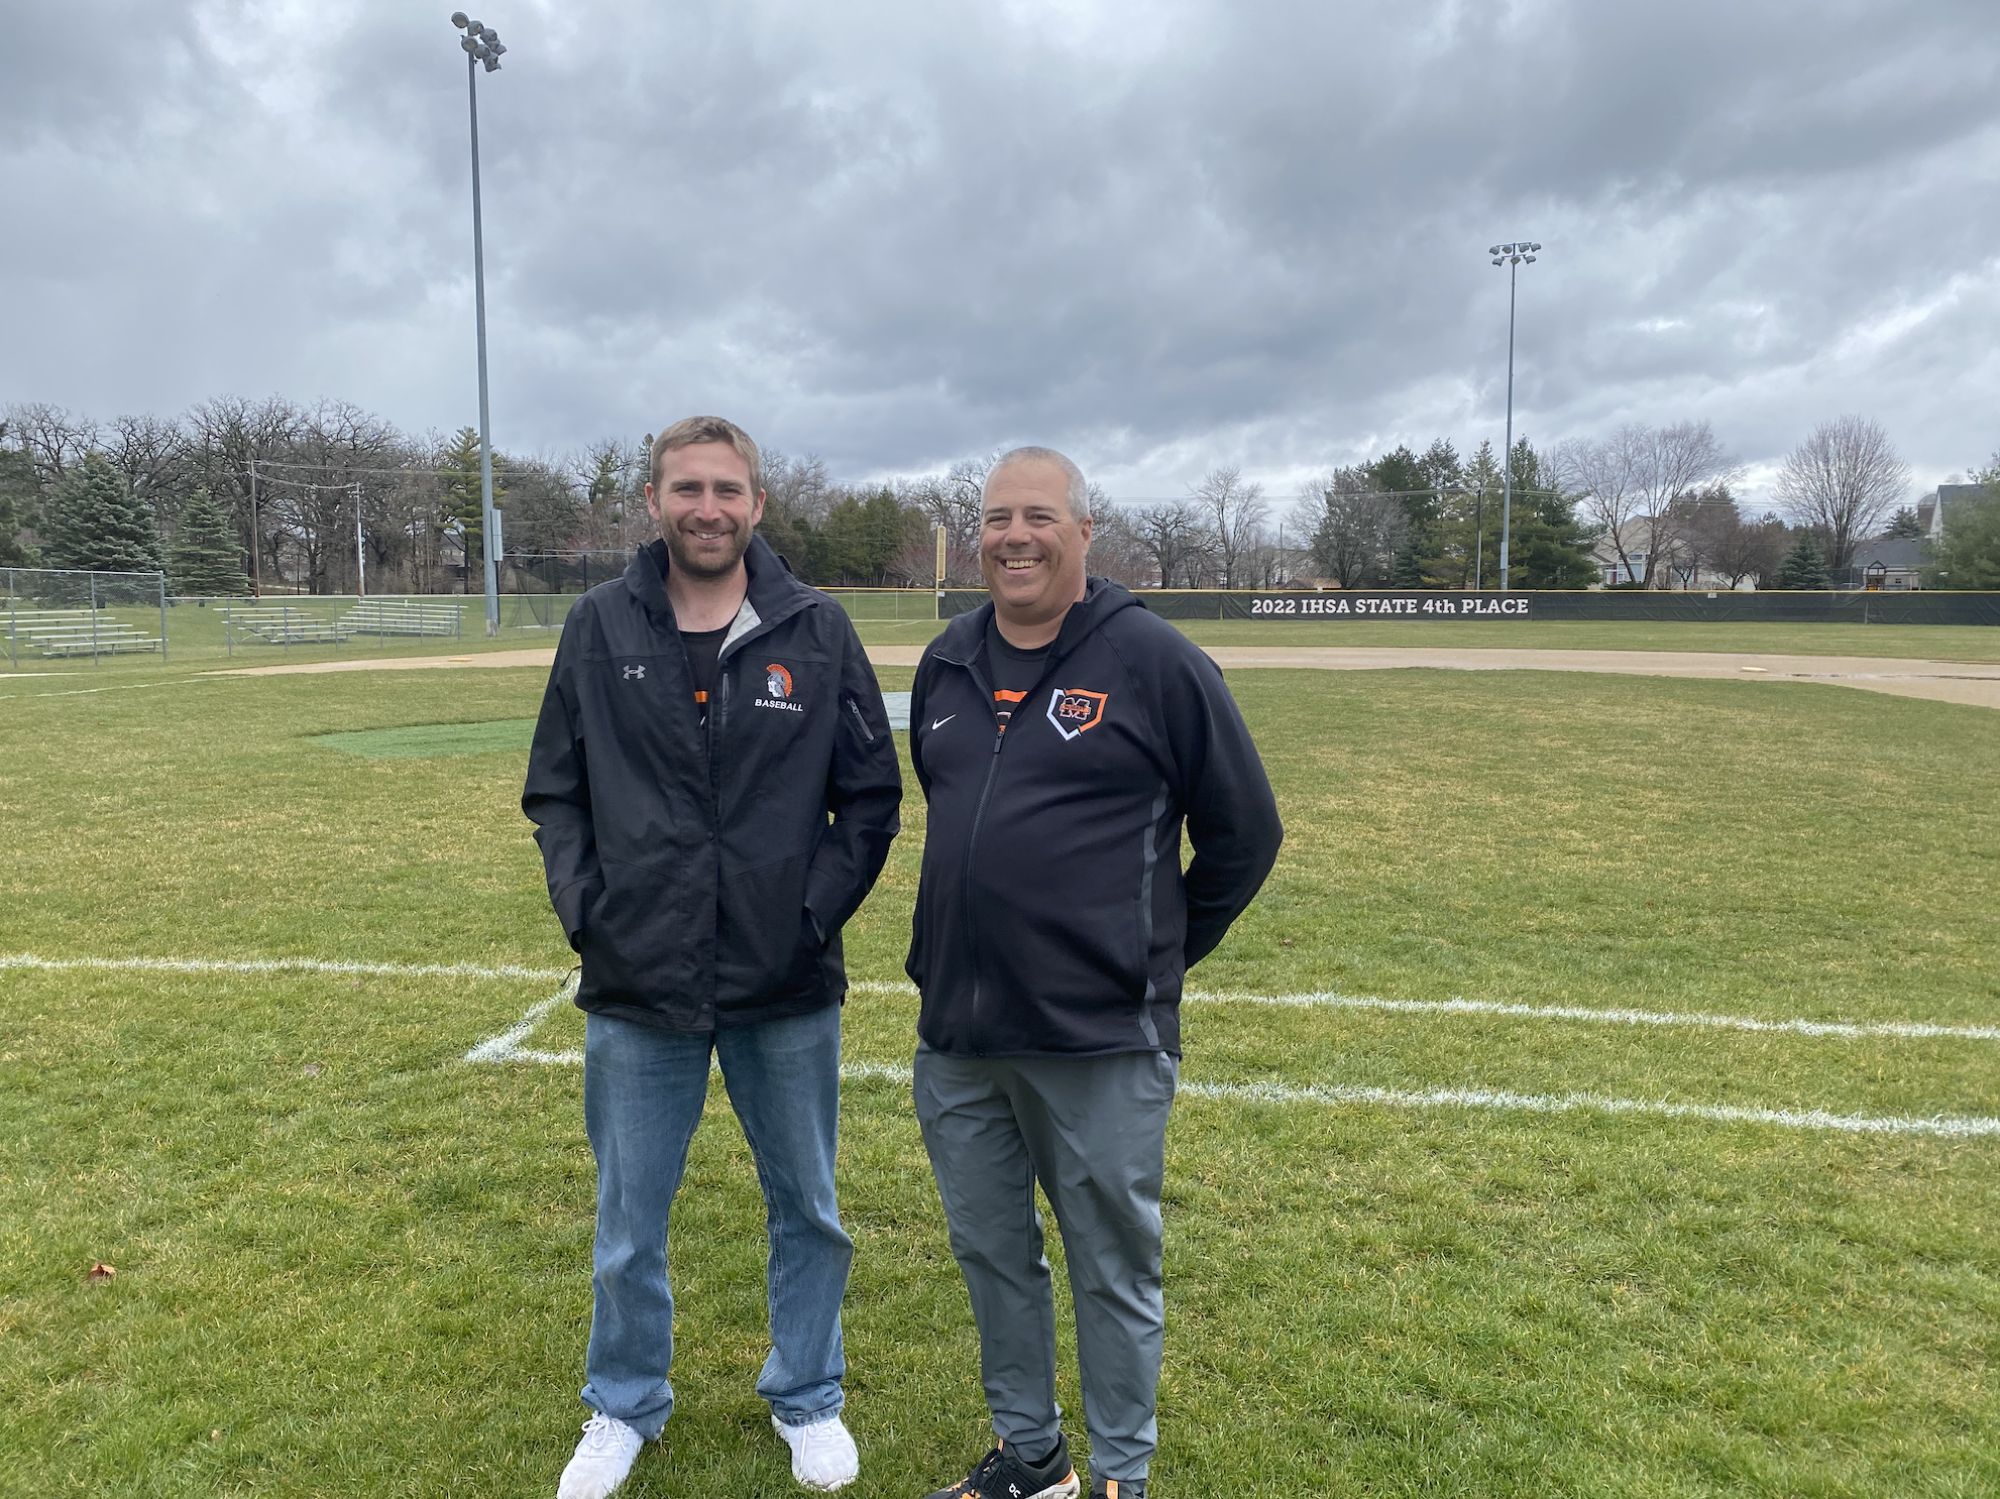 McHenry varsity baseball coach Brian Rockweiler, right, and pitching coach Zach Badgley on the field at Petersen Park.